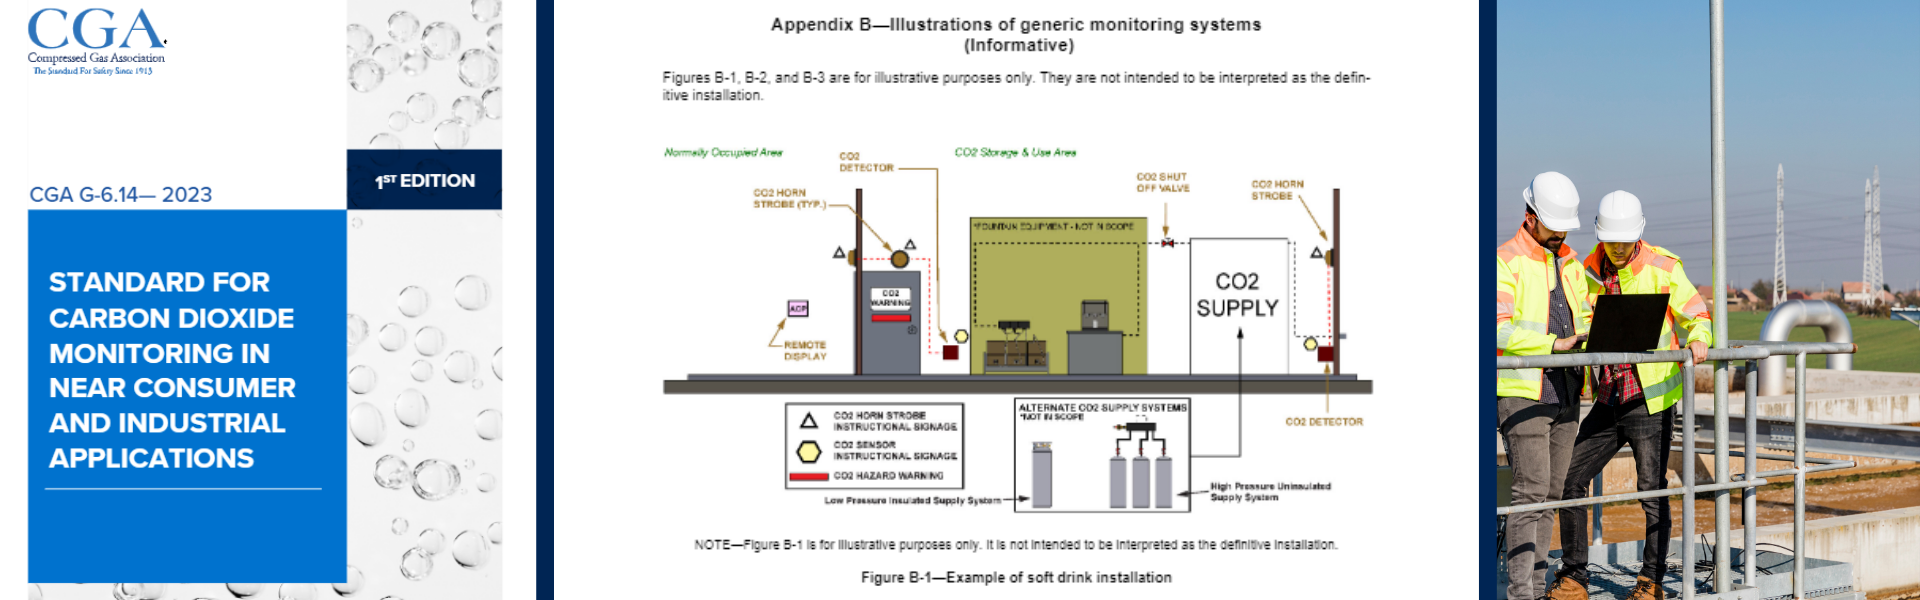 CGA Standard for Carbon Dioxide Monitoring